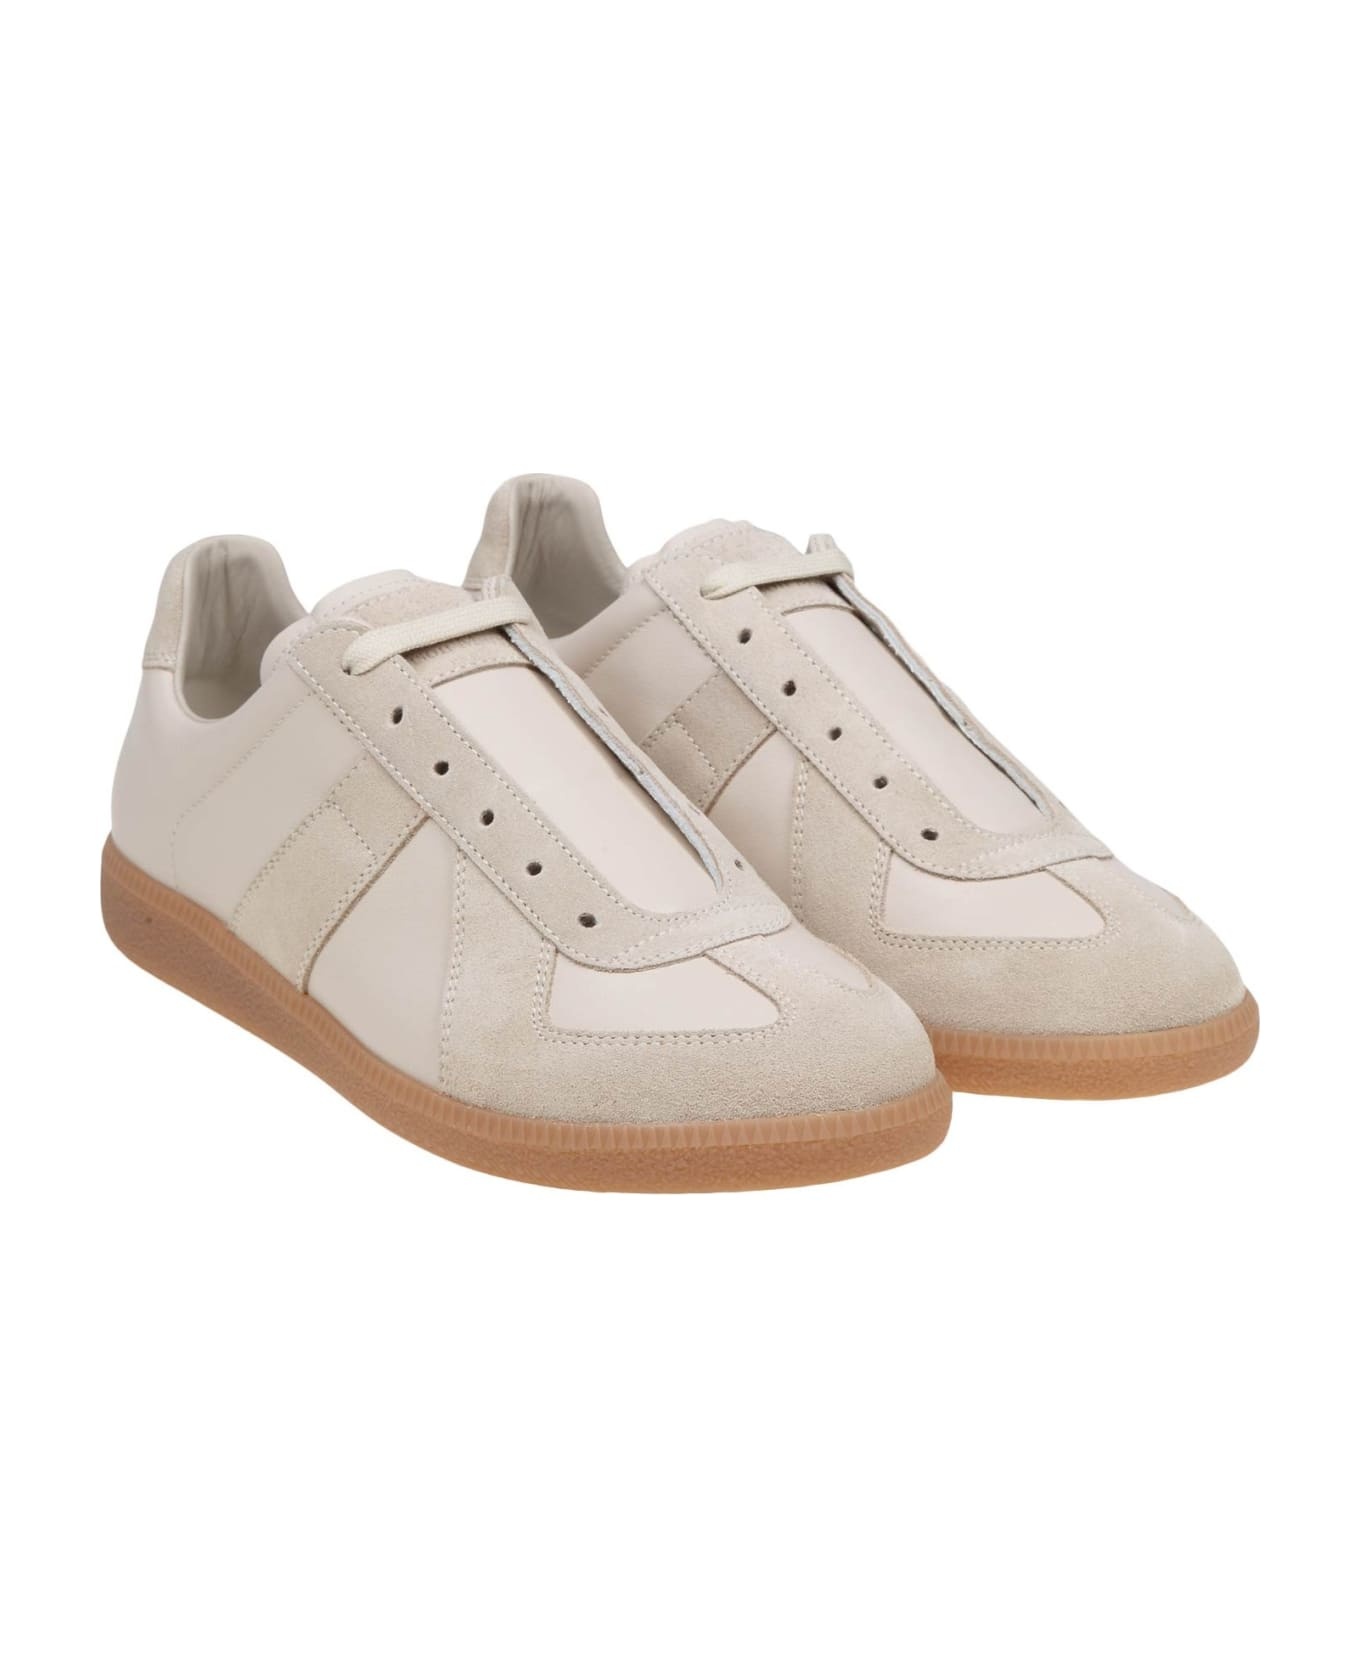 Replica Sneakers In Leather And Suede - 2